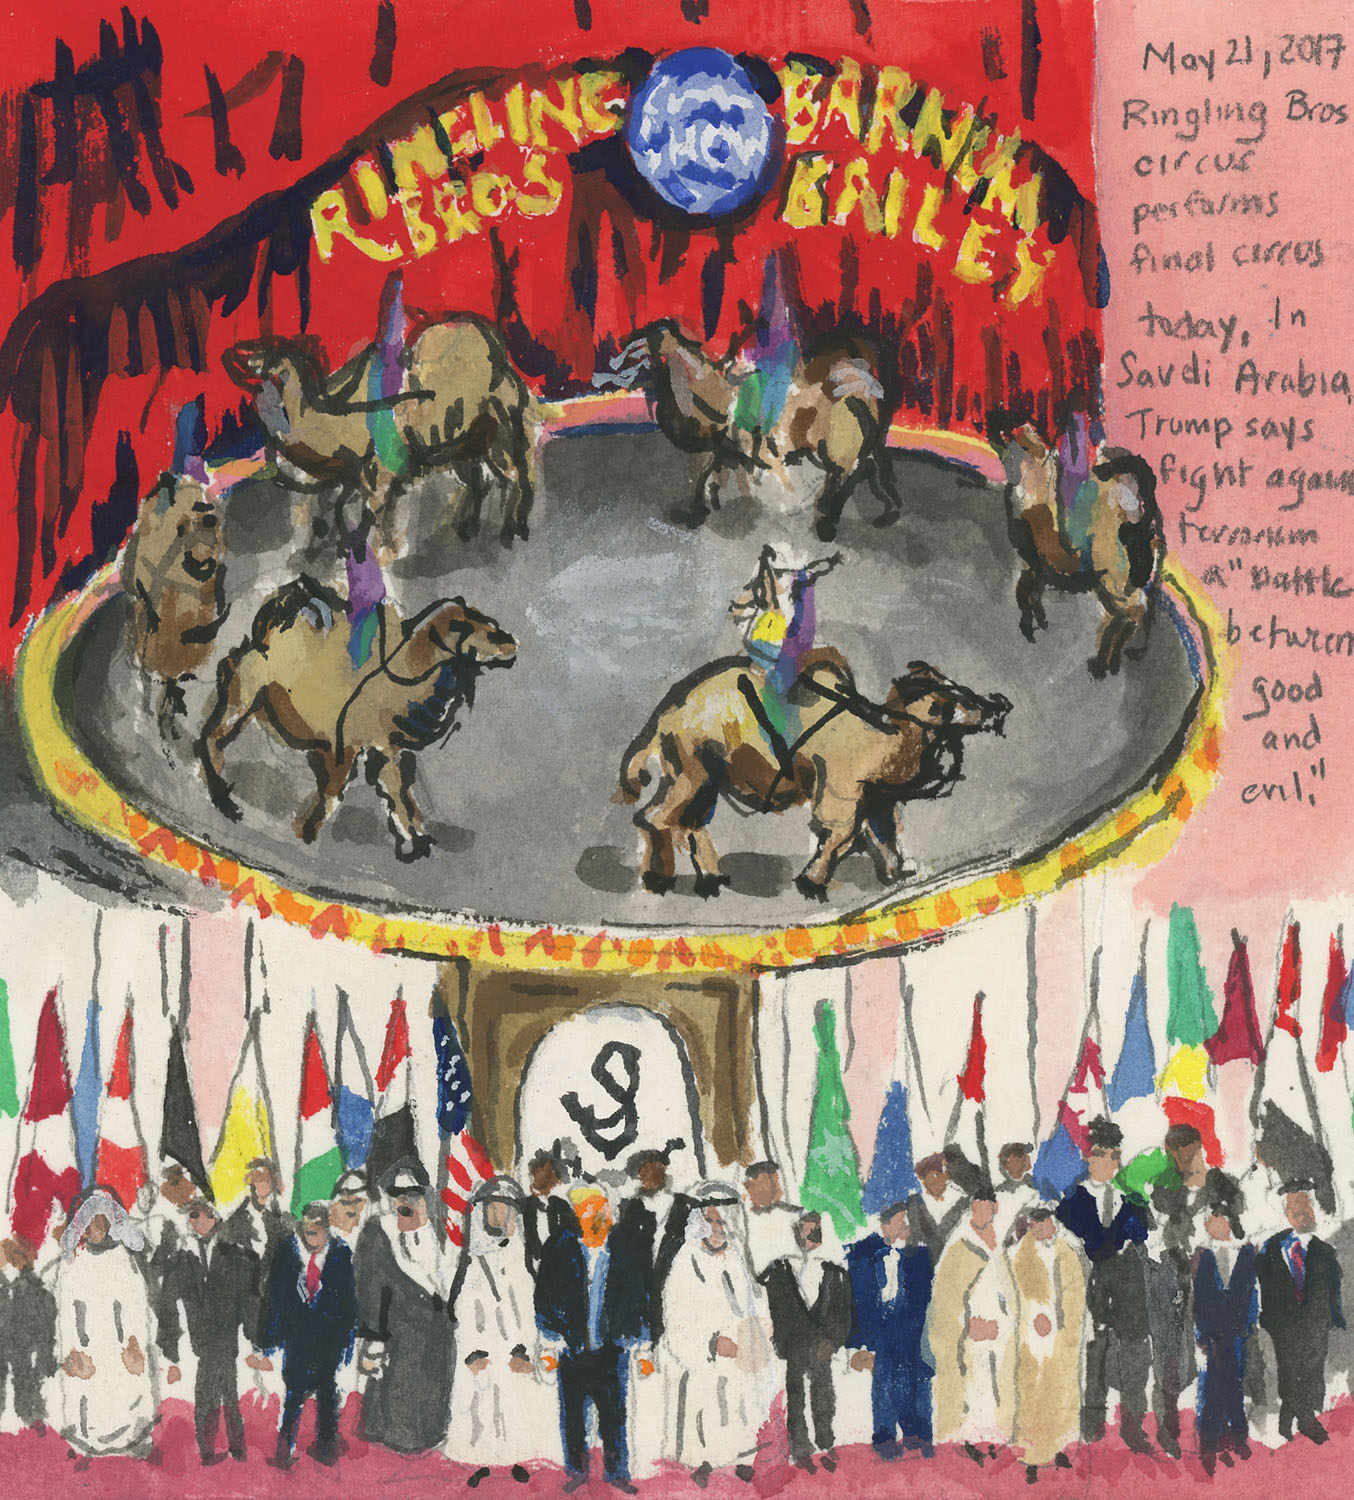 Day 547 (May 21, 2017) <br>Watercolor, gouache, graphite on paper, 6 x 5 ½ in. <br><i>Ringling Bros. Circus performs final circus today, In Saudi Arabia, Trump says fight against terrorism a “battle between good and evil.”</i>